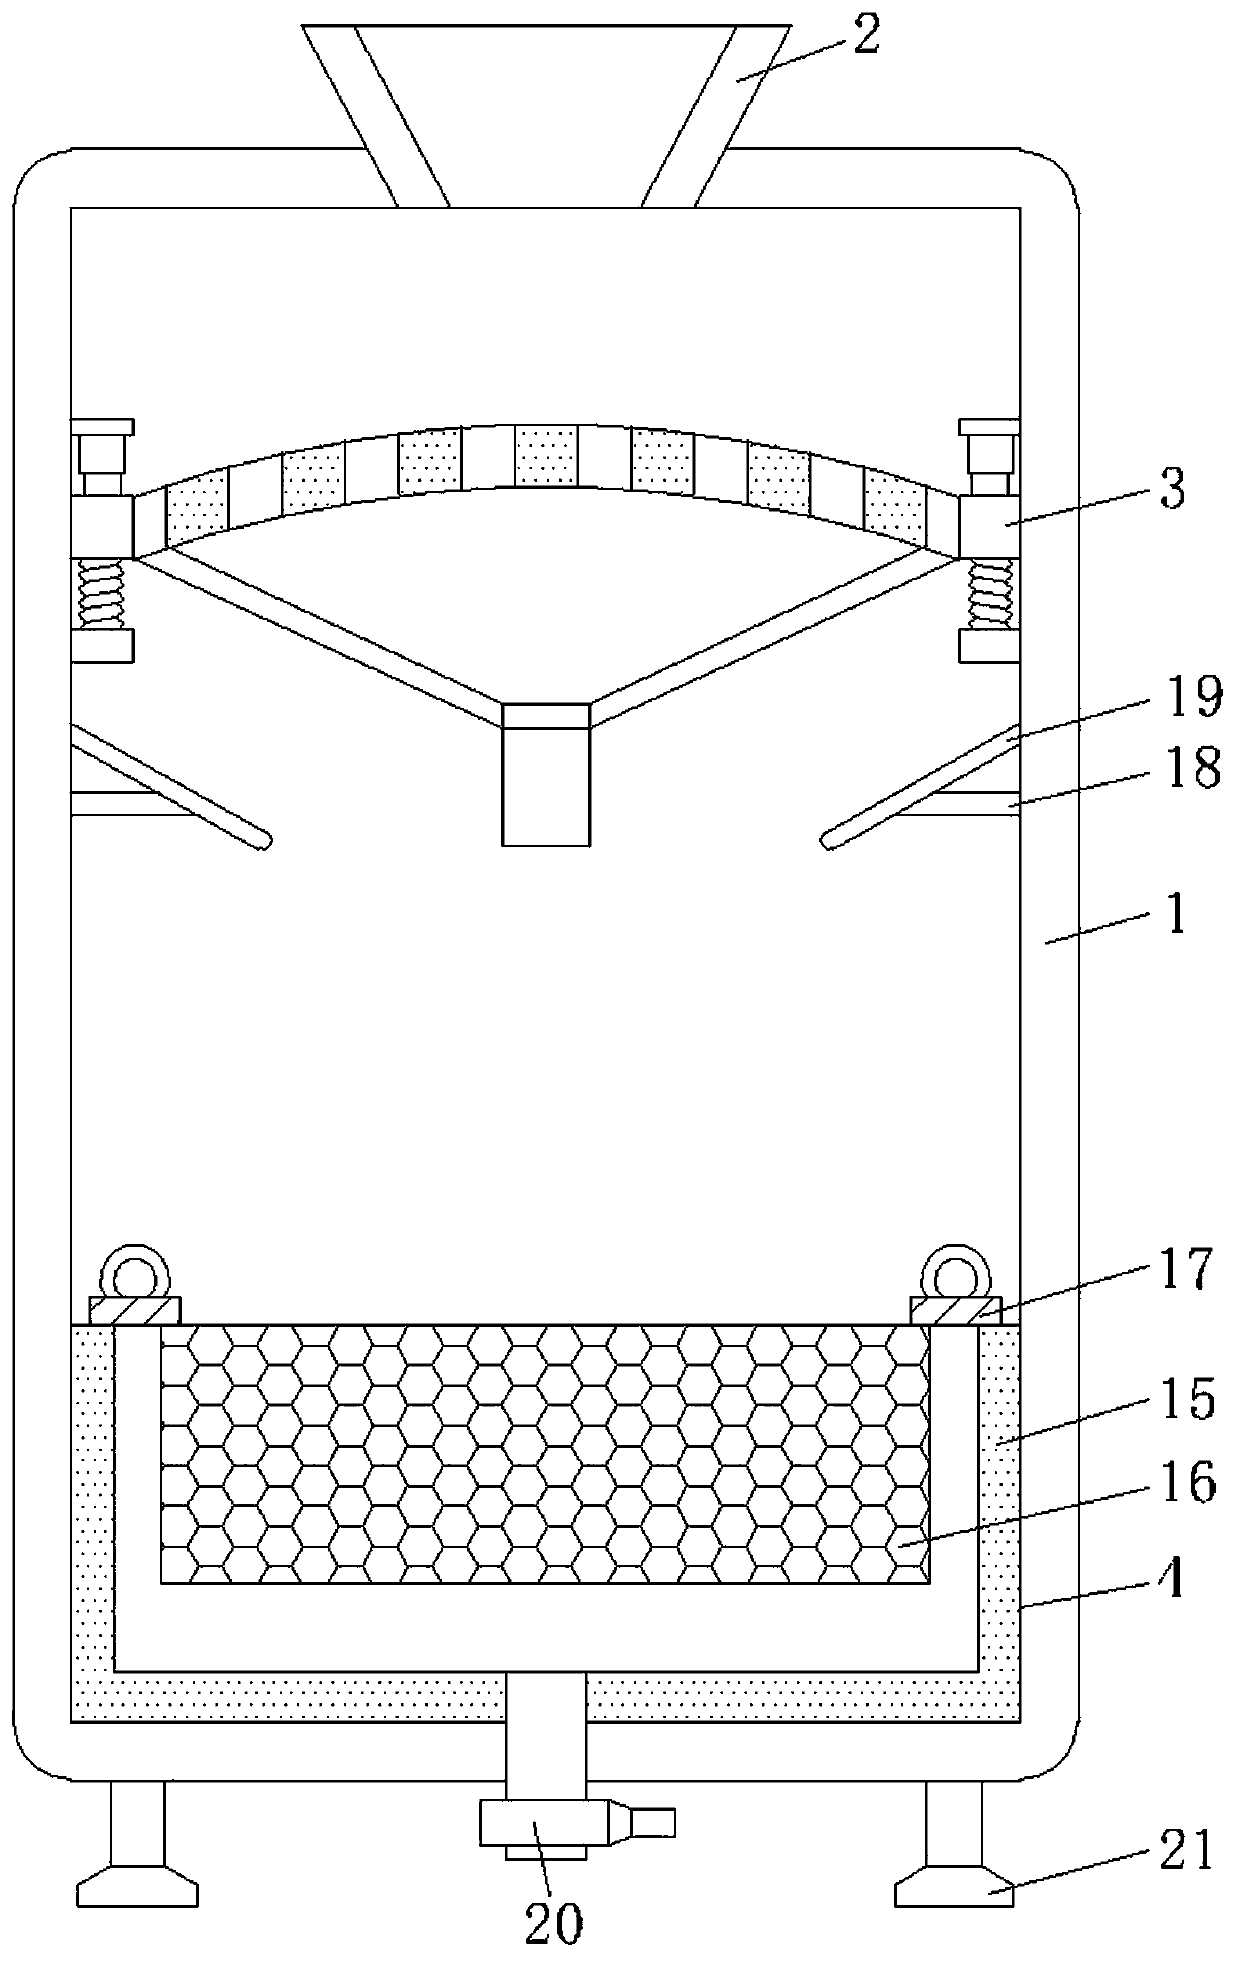 Screening device for lotus seeds